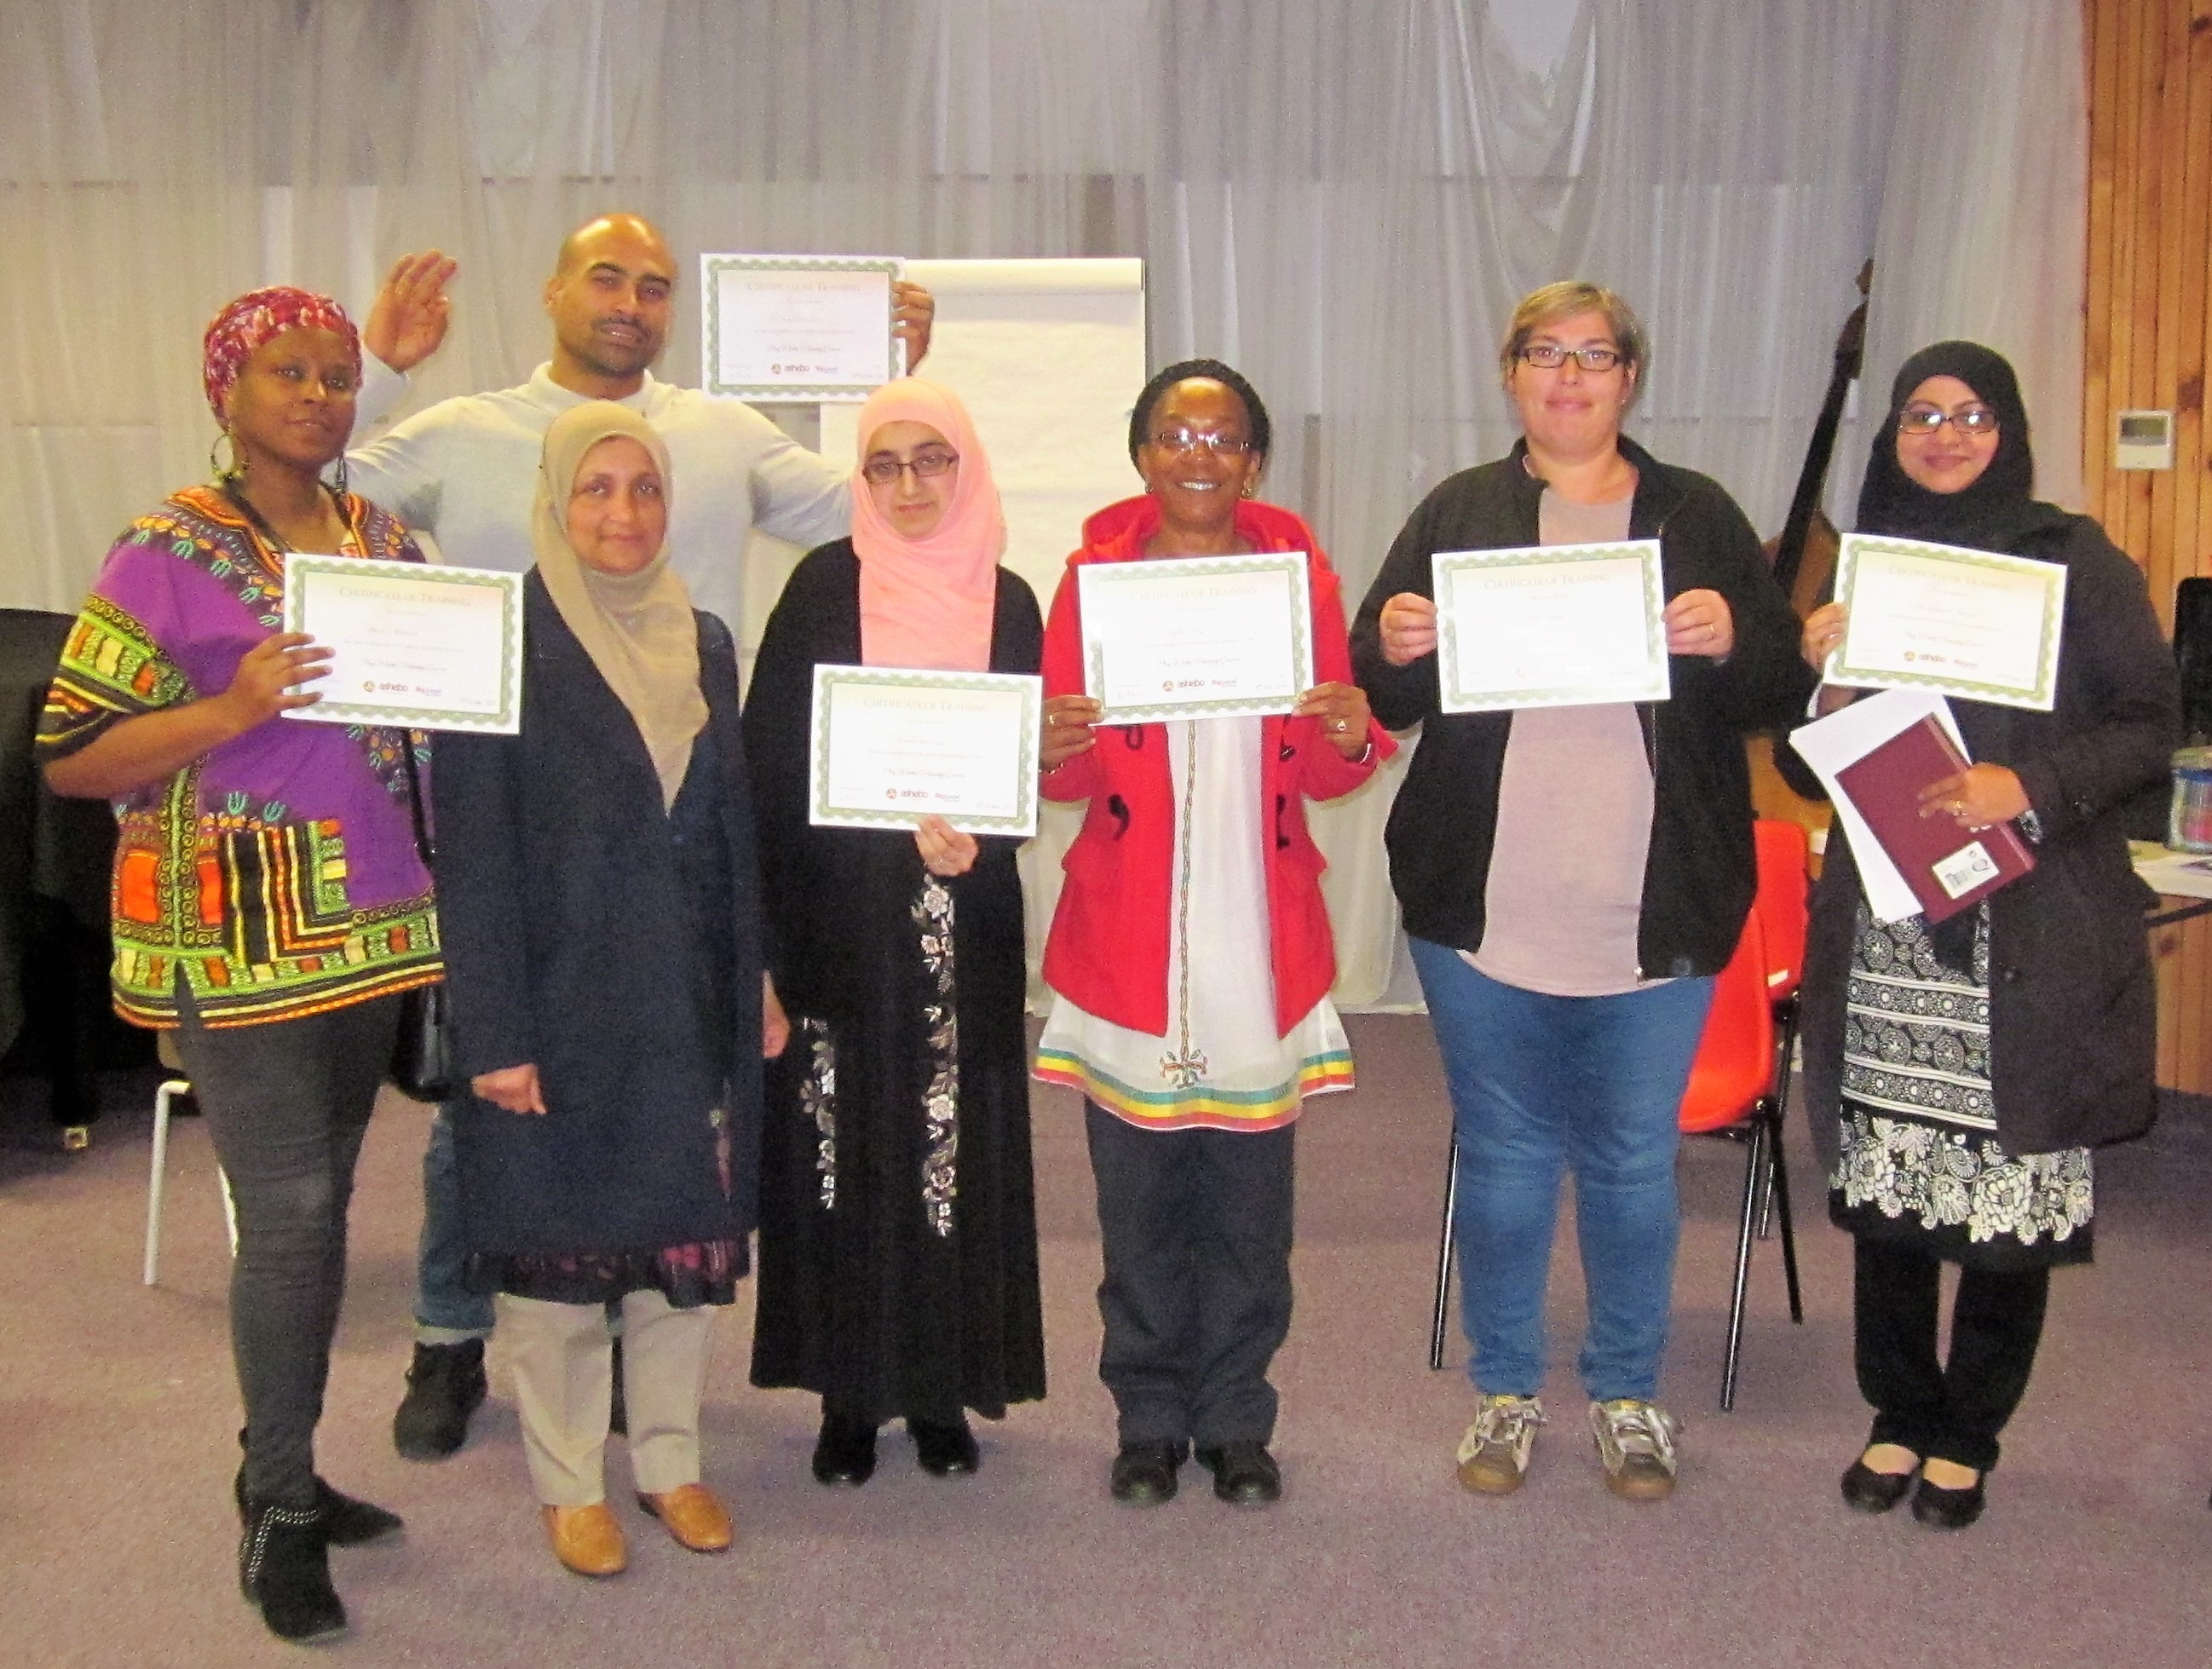 Play course participants with certificates